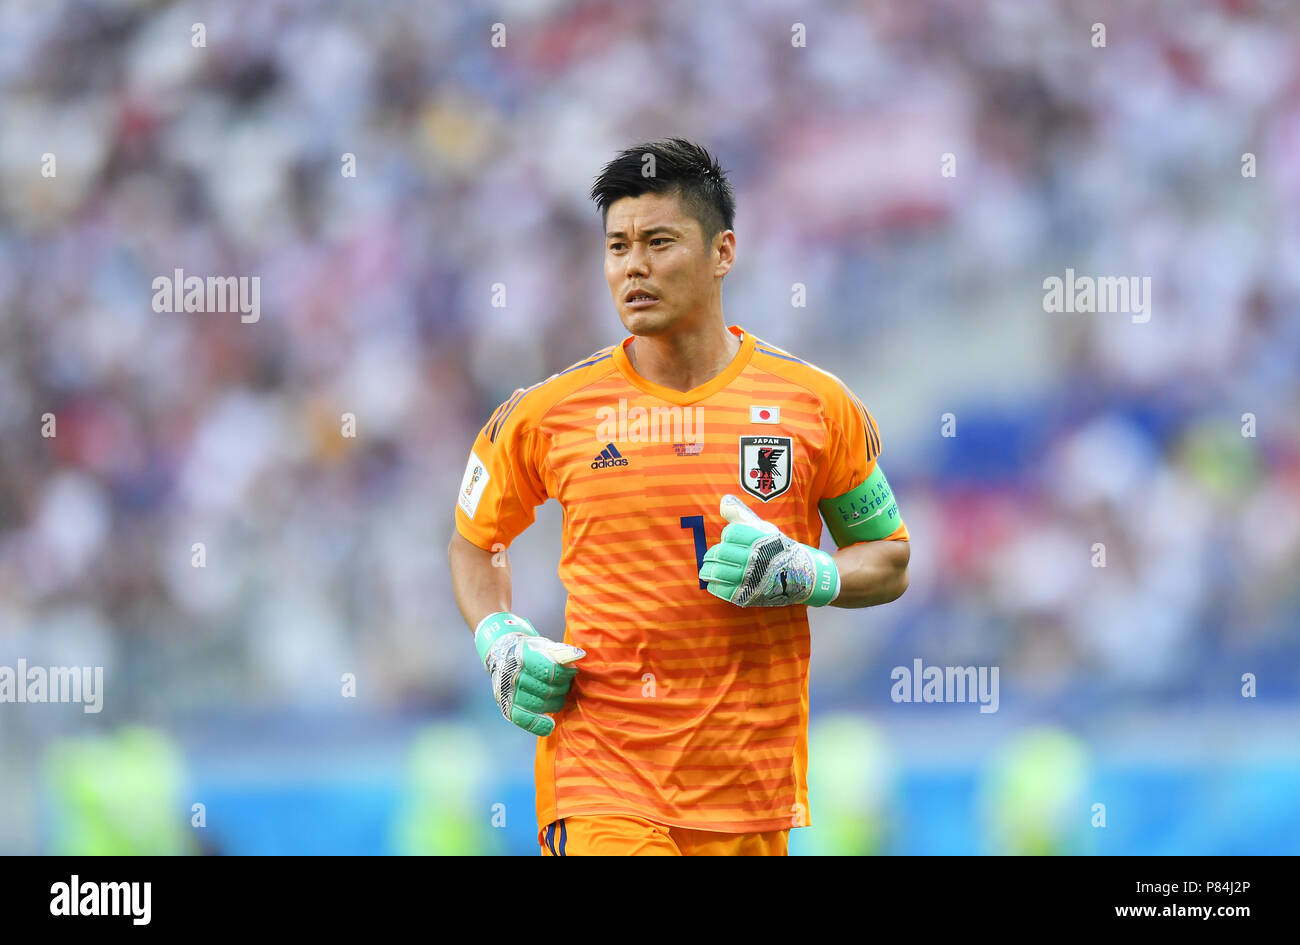 VOLGOGRAD, RUSSIA - JUNE 28: Eiji Kawashima of Japan in action during the 2018 FIFA World Cup Russia group H match between Japan and Poland at Volgograd Arena on June 28, 2018 in Volgograd, Russia. (Photo by Lukasz Laskowski/PressFocus/MB Media/) Stock Photo